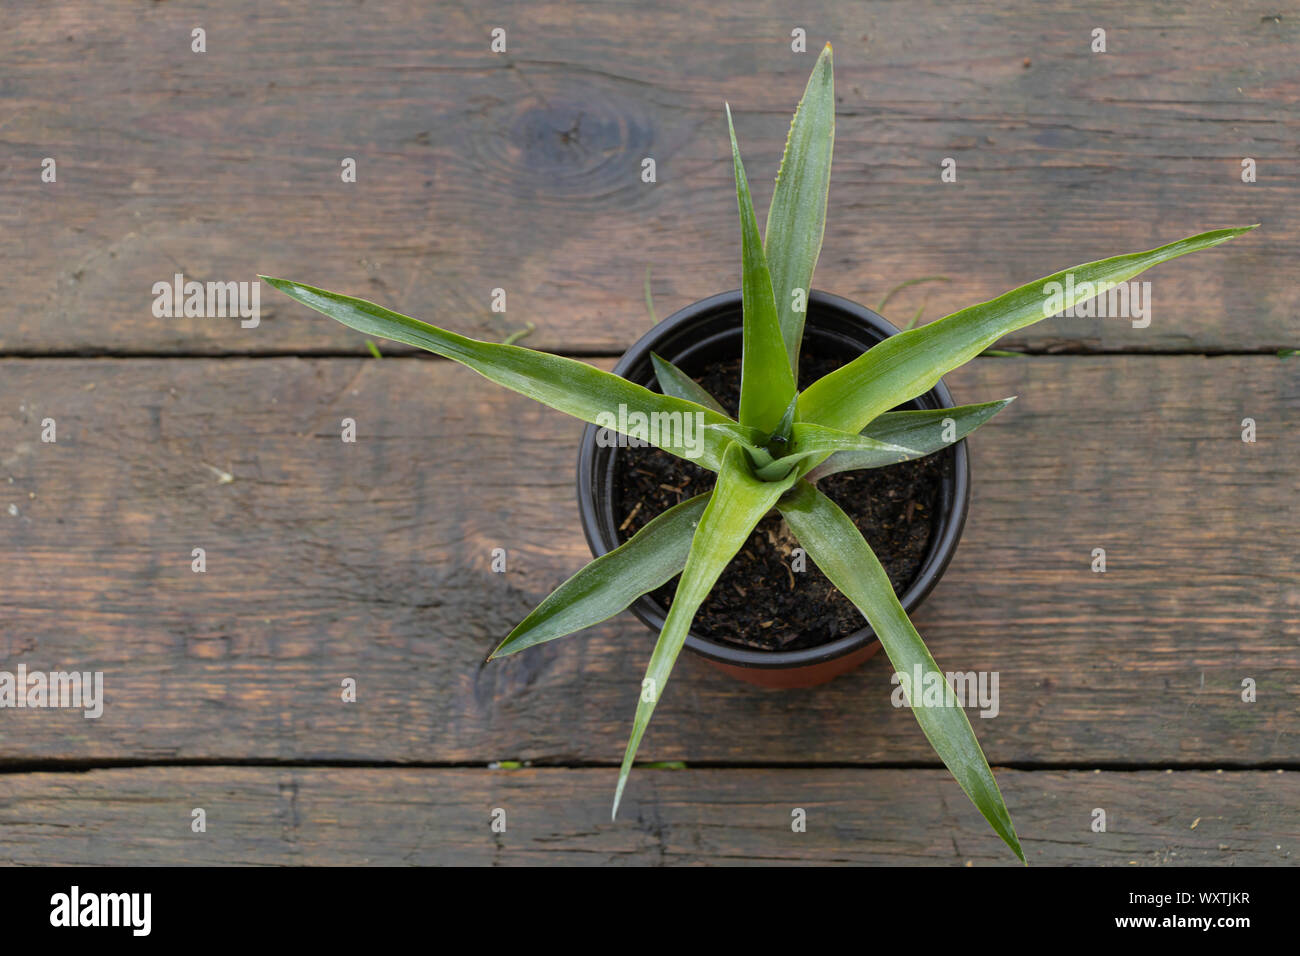 A pineapple plant in a pot on a wooden background. Stock Photo